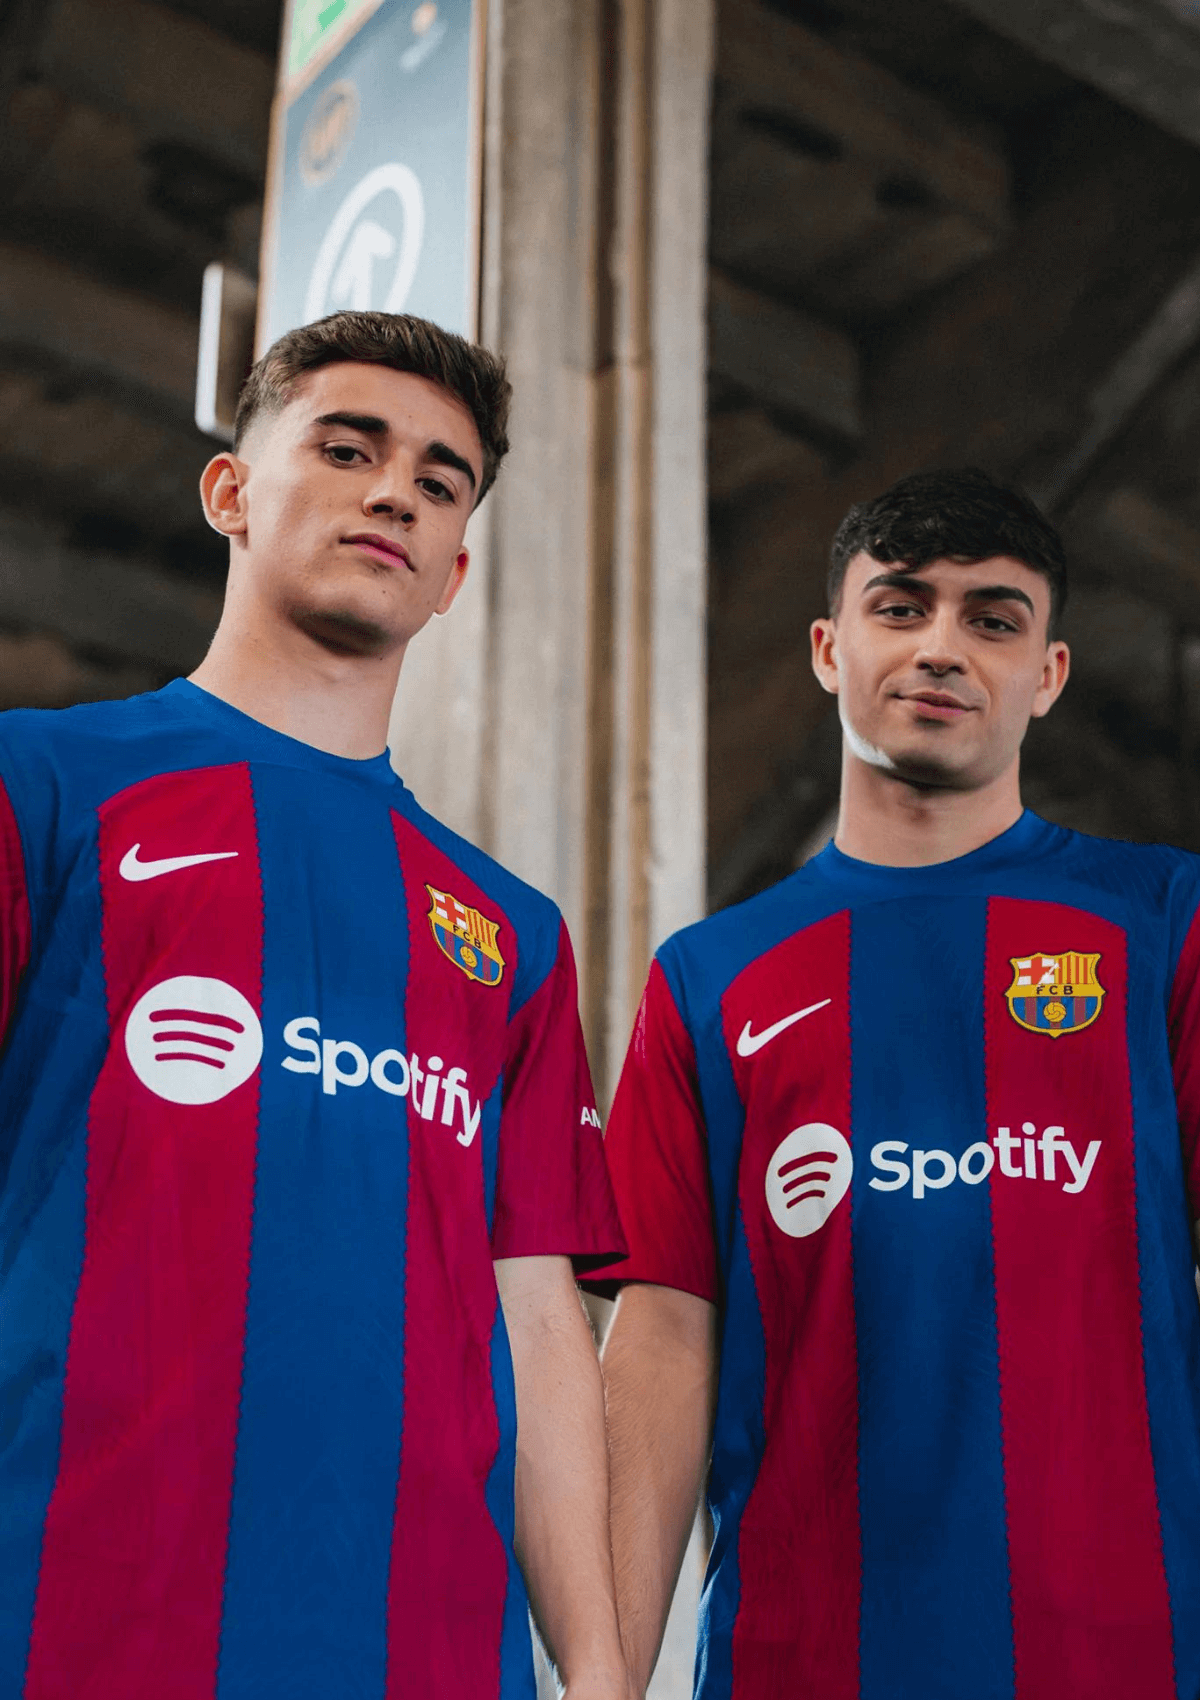 buy an authentic Barcelona FC football shirt from Camp Nou in the city